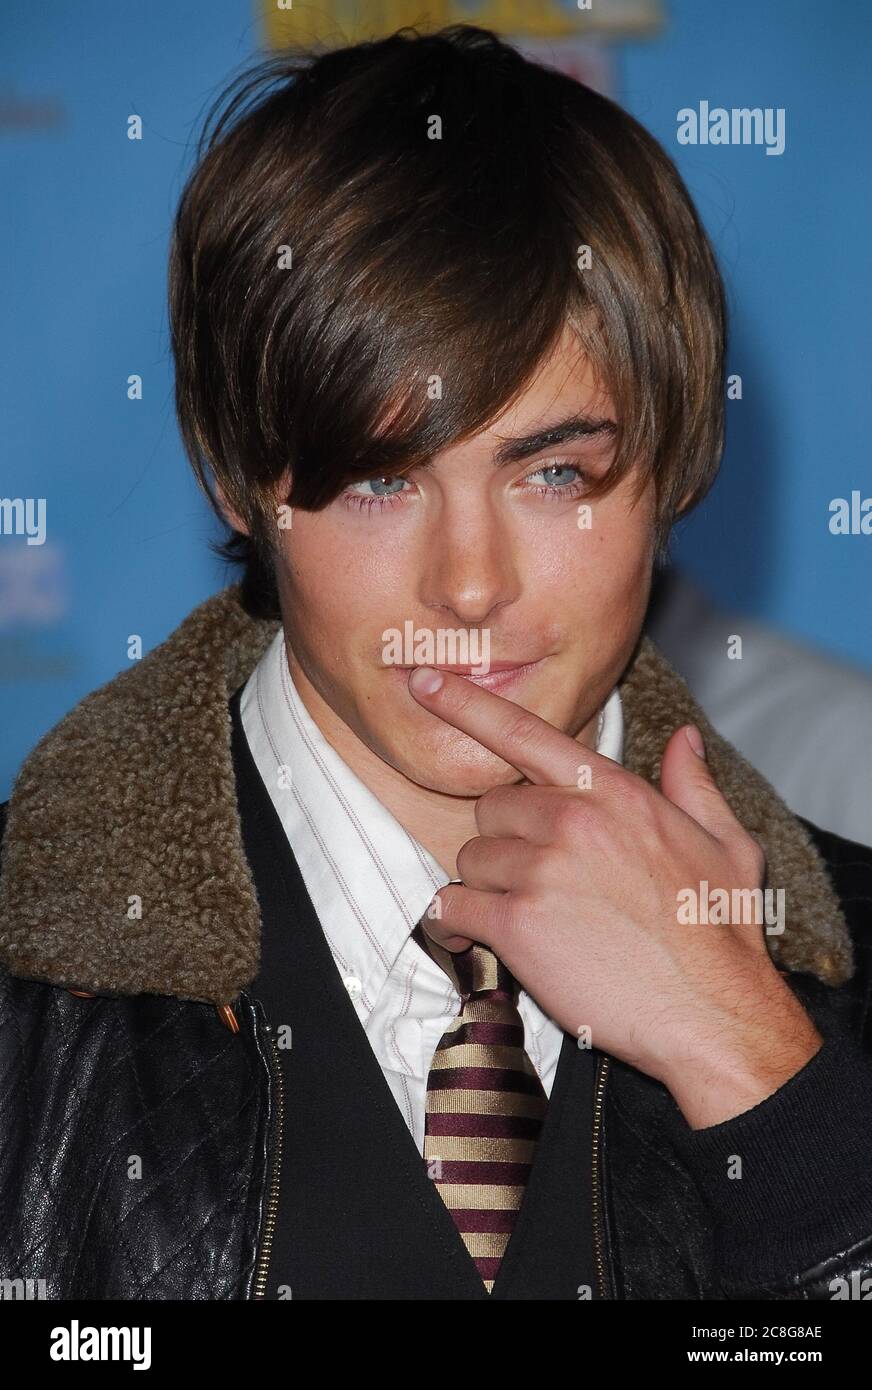 Zac Efron at the High School Musical 2: Extended Edition DVD Release Premiere held at the El Capitan Theatre in Hollywood, CA. The event took place on Monday, November 19, 2007. Photo by: SBM / PictureLux - File Reference # 34006-11927SBMPLX Stock Photo